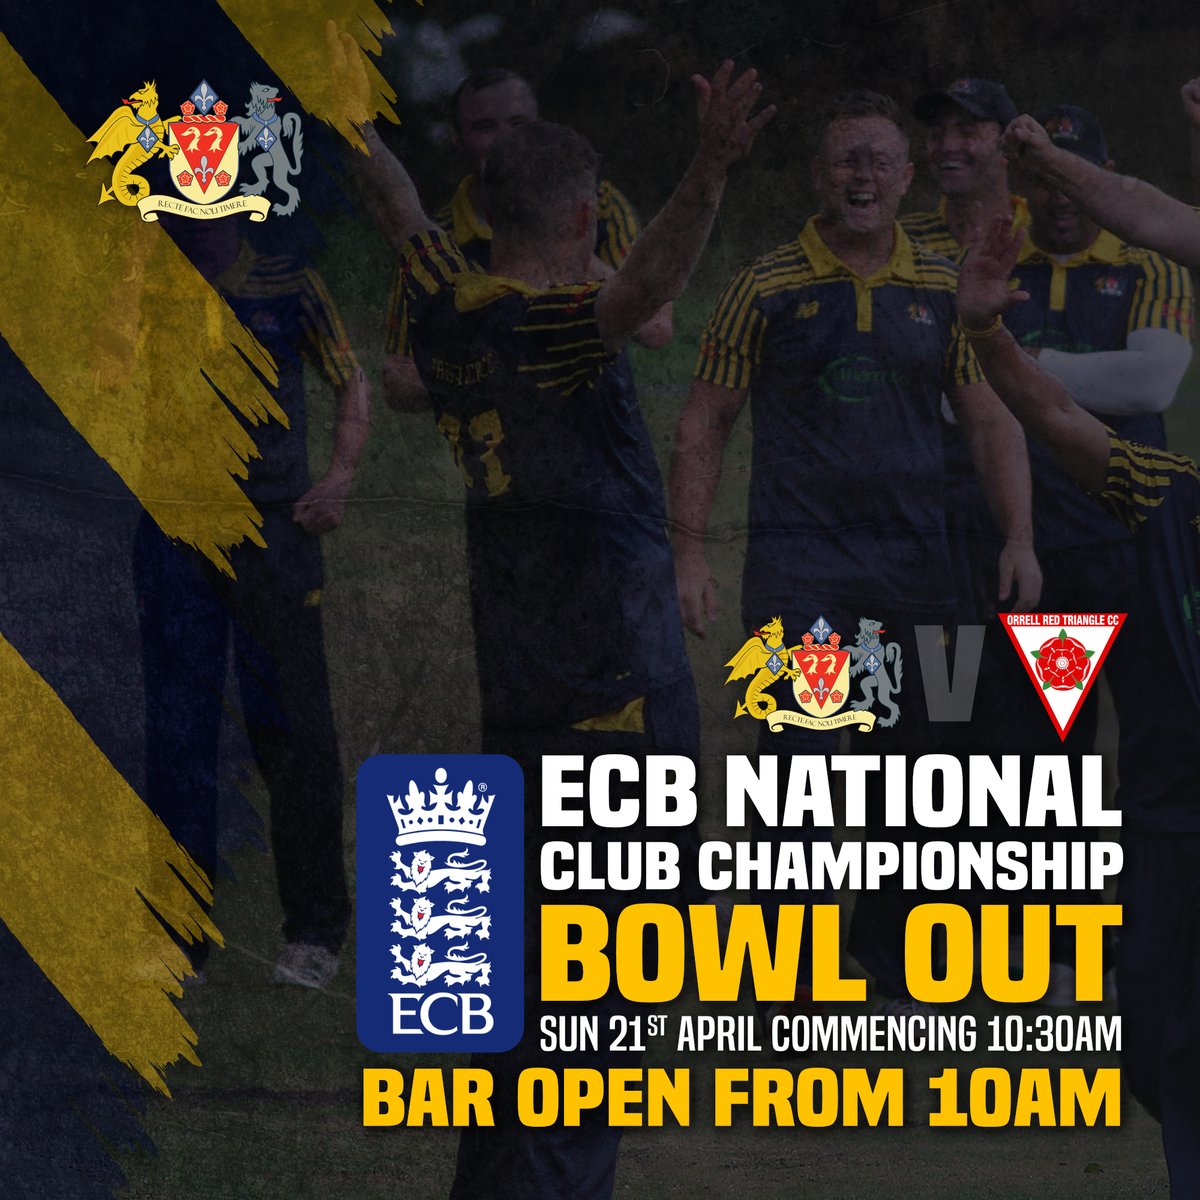 Our 1XI's scheduled ECB National Club Championship game at home to @orrellcricket is off and will be replaced with a bowl out to decide who goes through to the next round. The bowl out will start at 10:30am and the bar will be open from 10am for all you Sunday early starters!